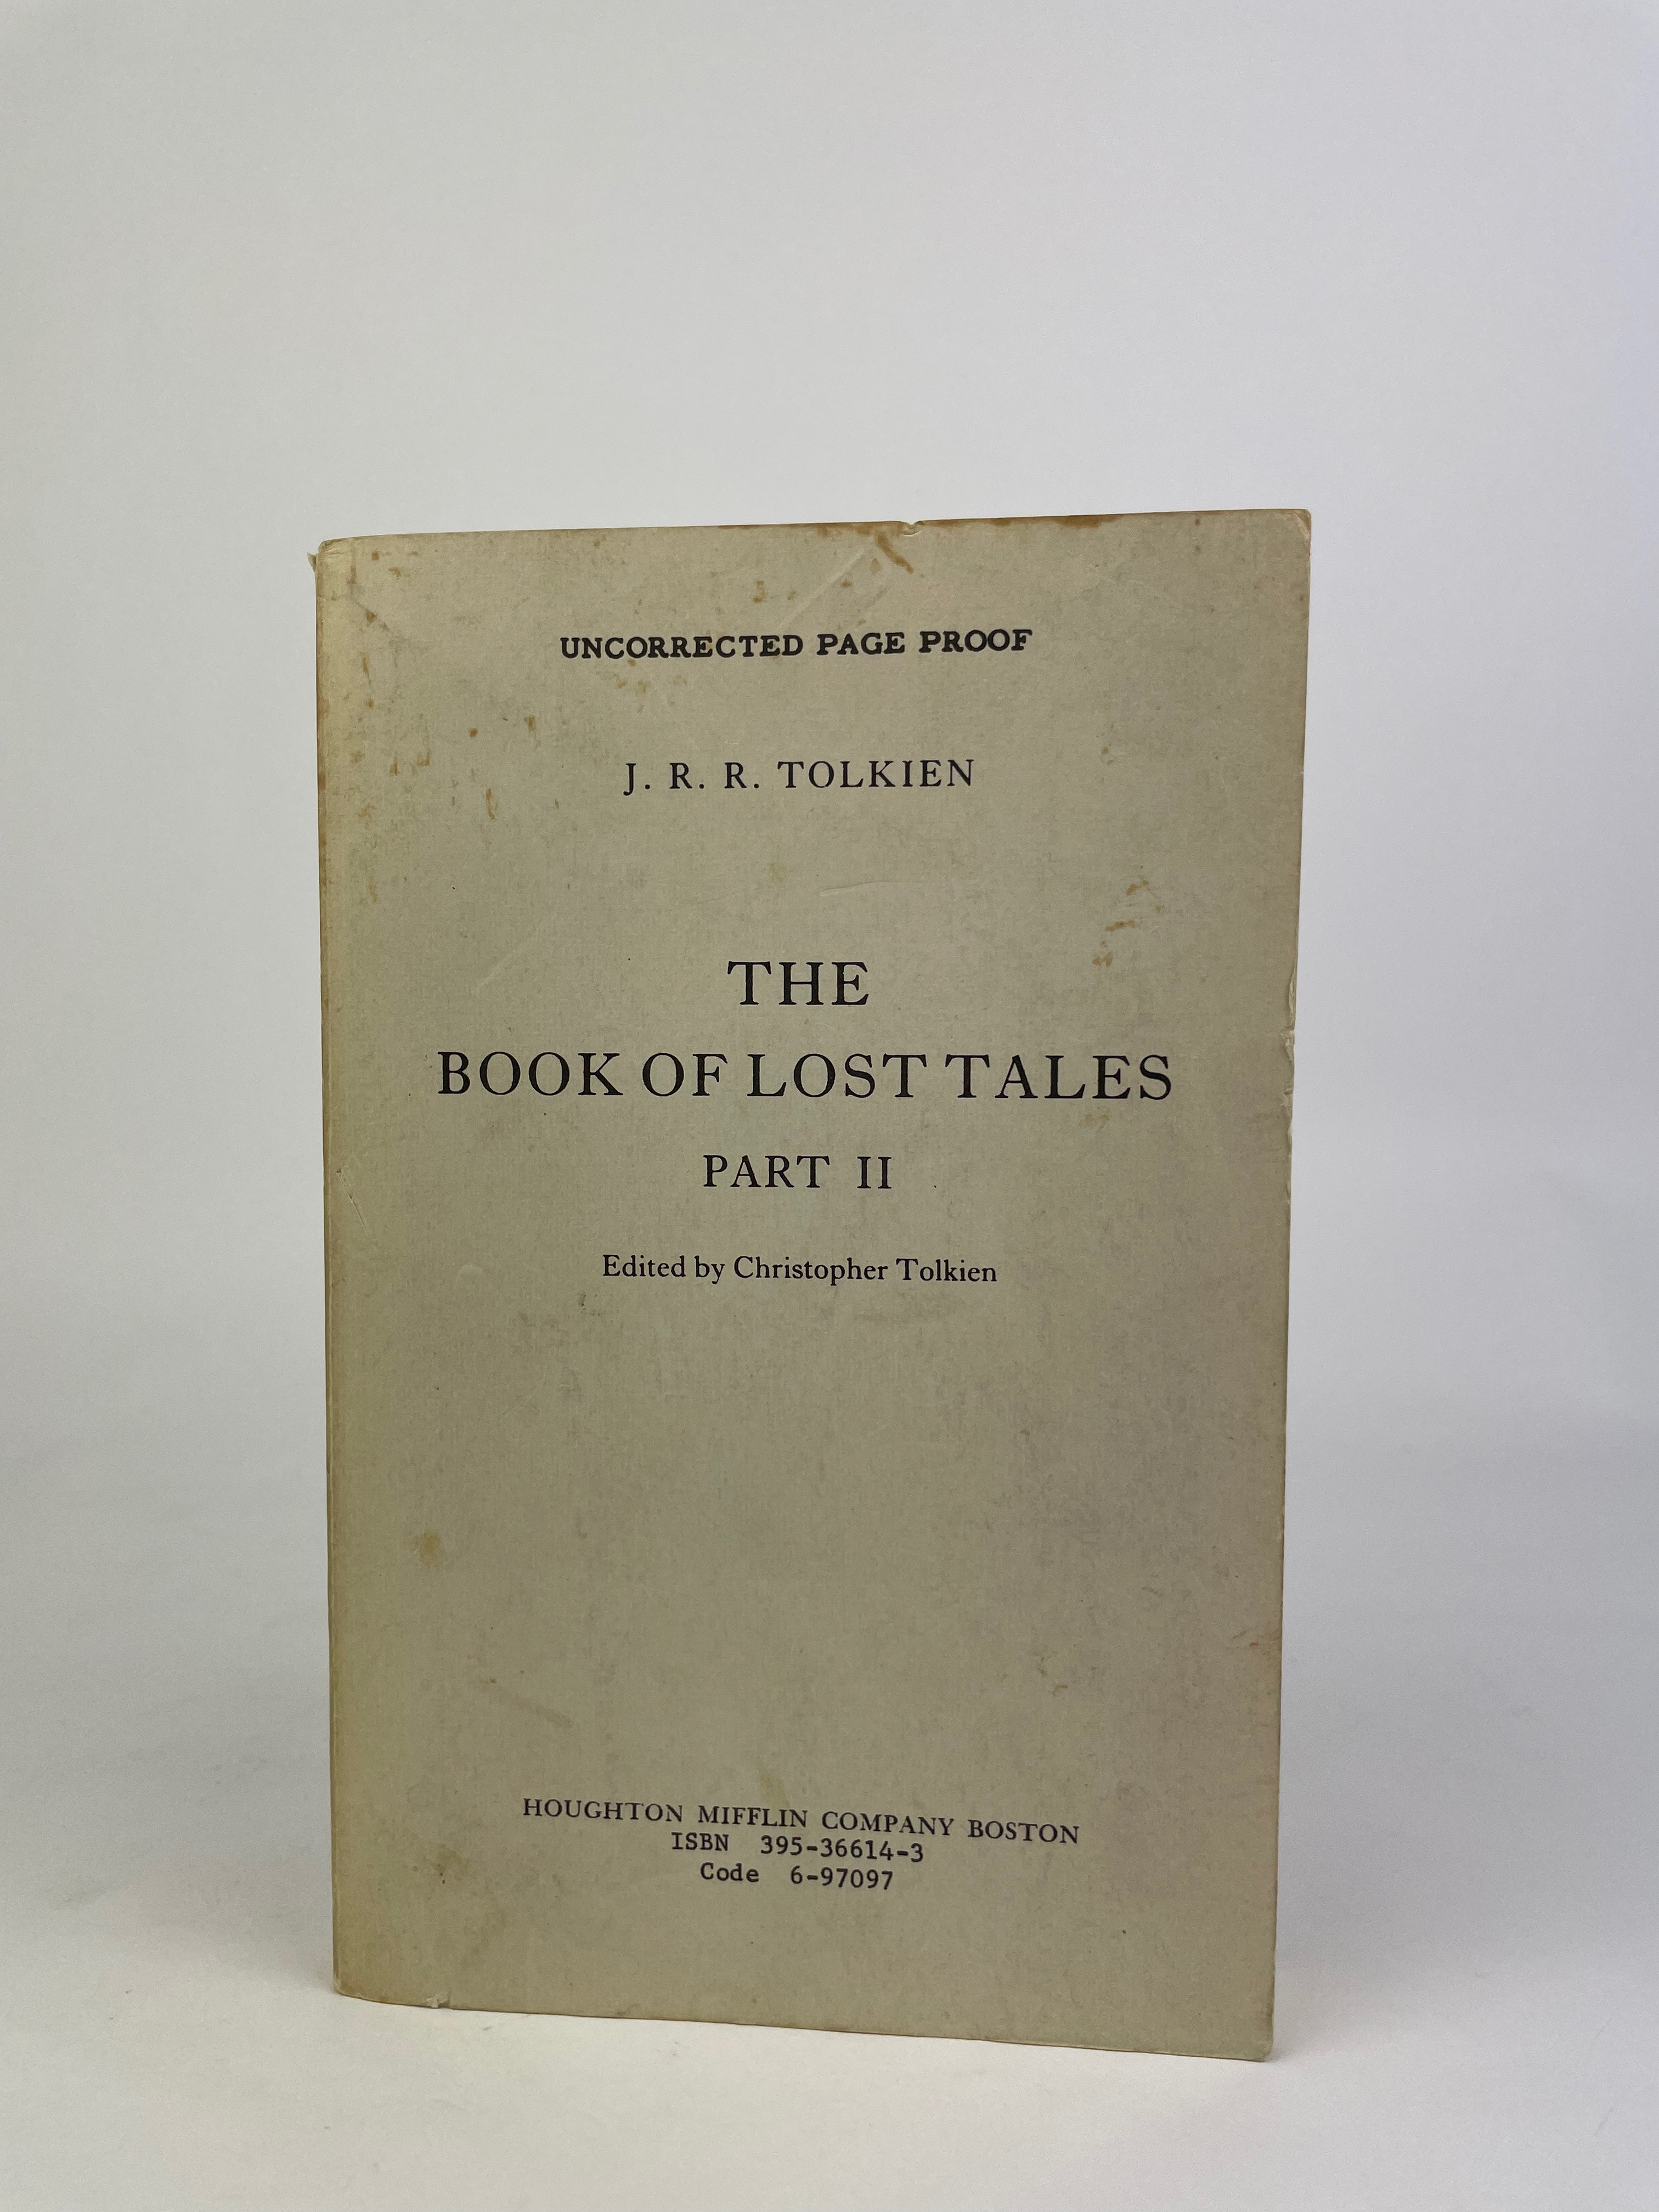 Advance Uncorrected Proof of The Book of Lost Tales II edited by Christoper Tolkien